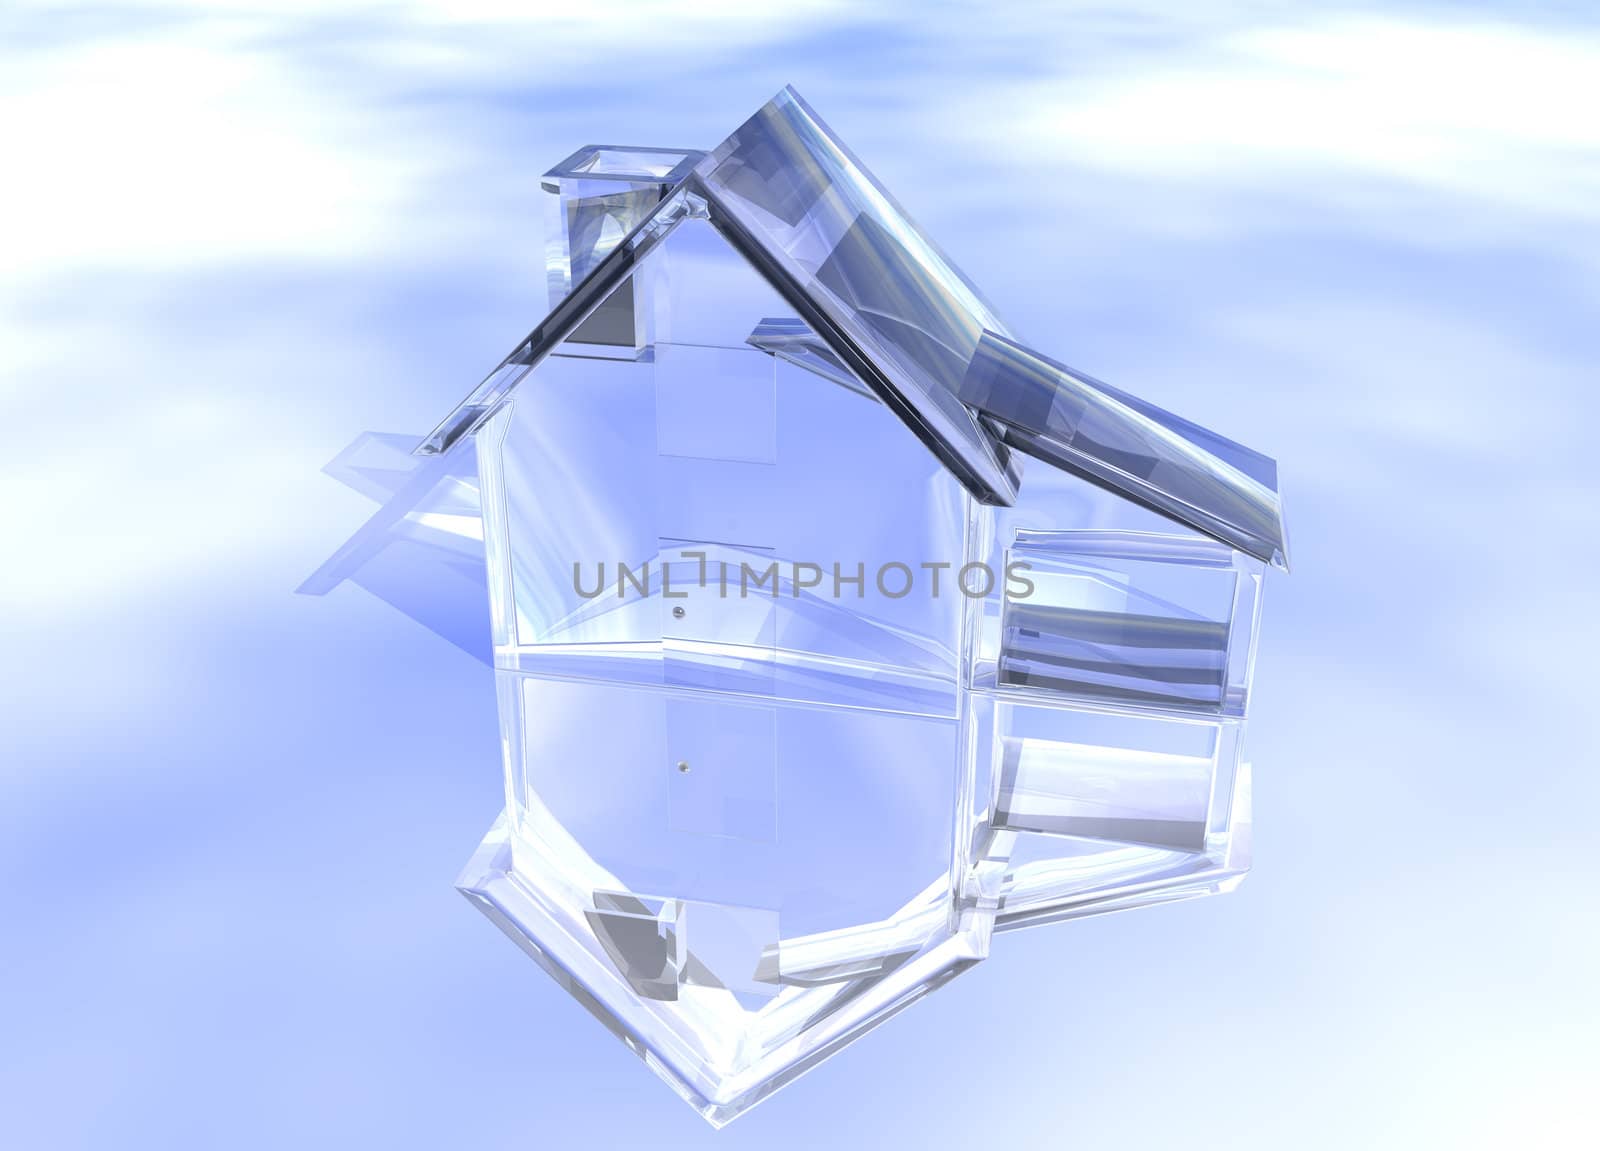 Luxury Clear Glass Diamond House Model on Blue-Sky Background with Reflection Concept Luxurious and Expensive Expense